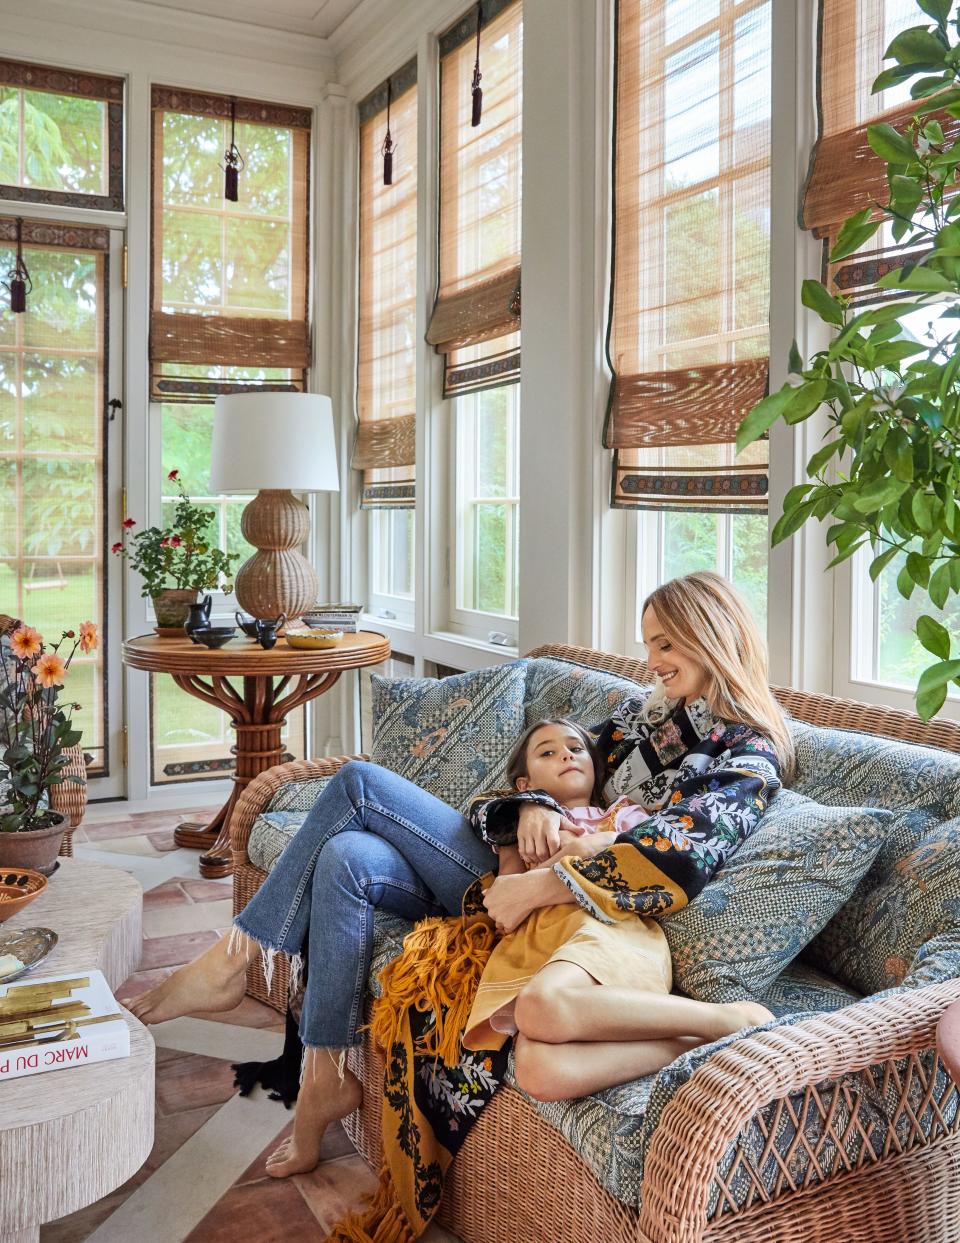 Santo Domingo (wearing an Oscar de la Renta coat) and her daughter, Beatrice, snuggle up on the sunporch. With its Lilou Marquand rattan shades, it doubles as a cozy dining room in inclement weather.